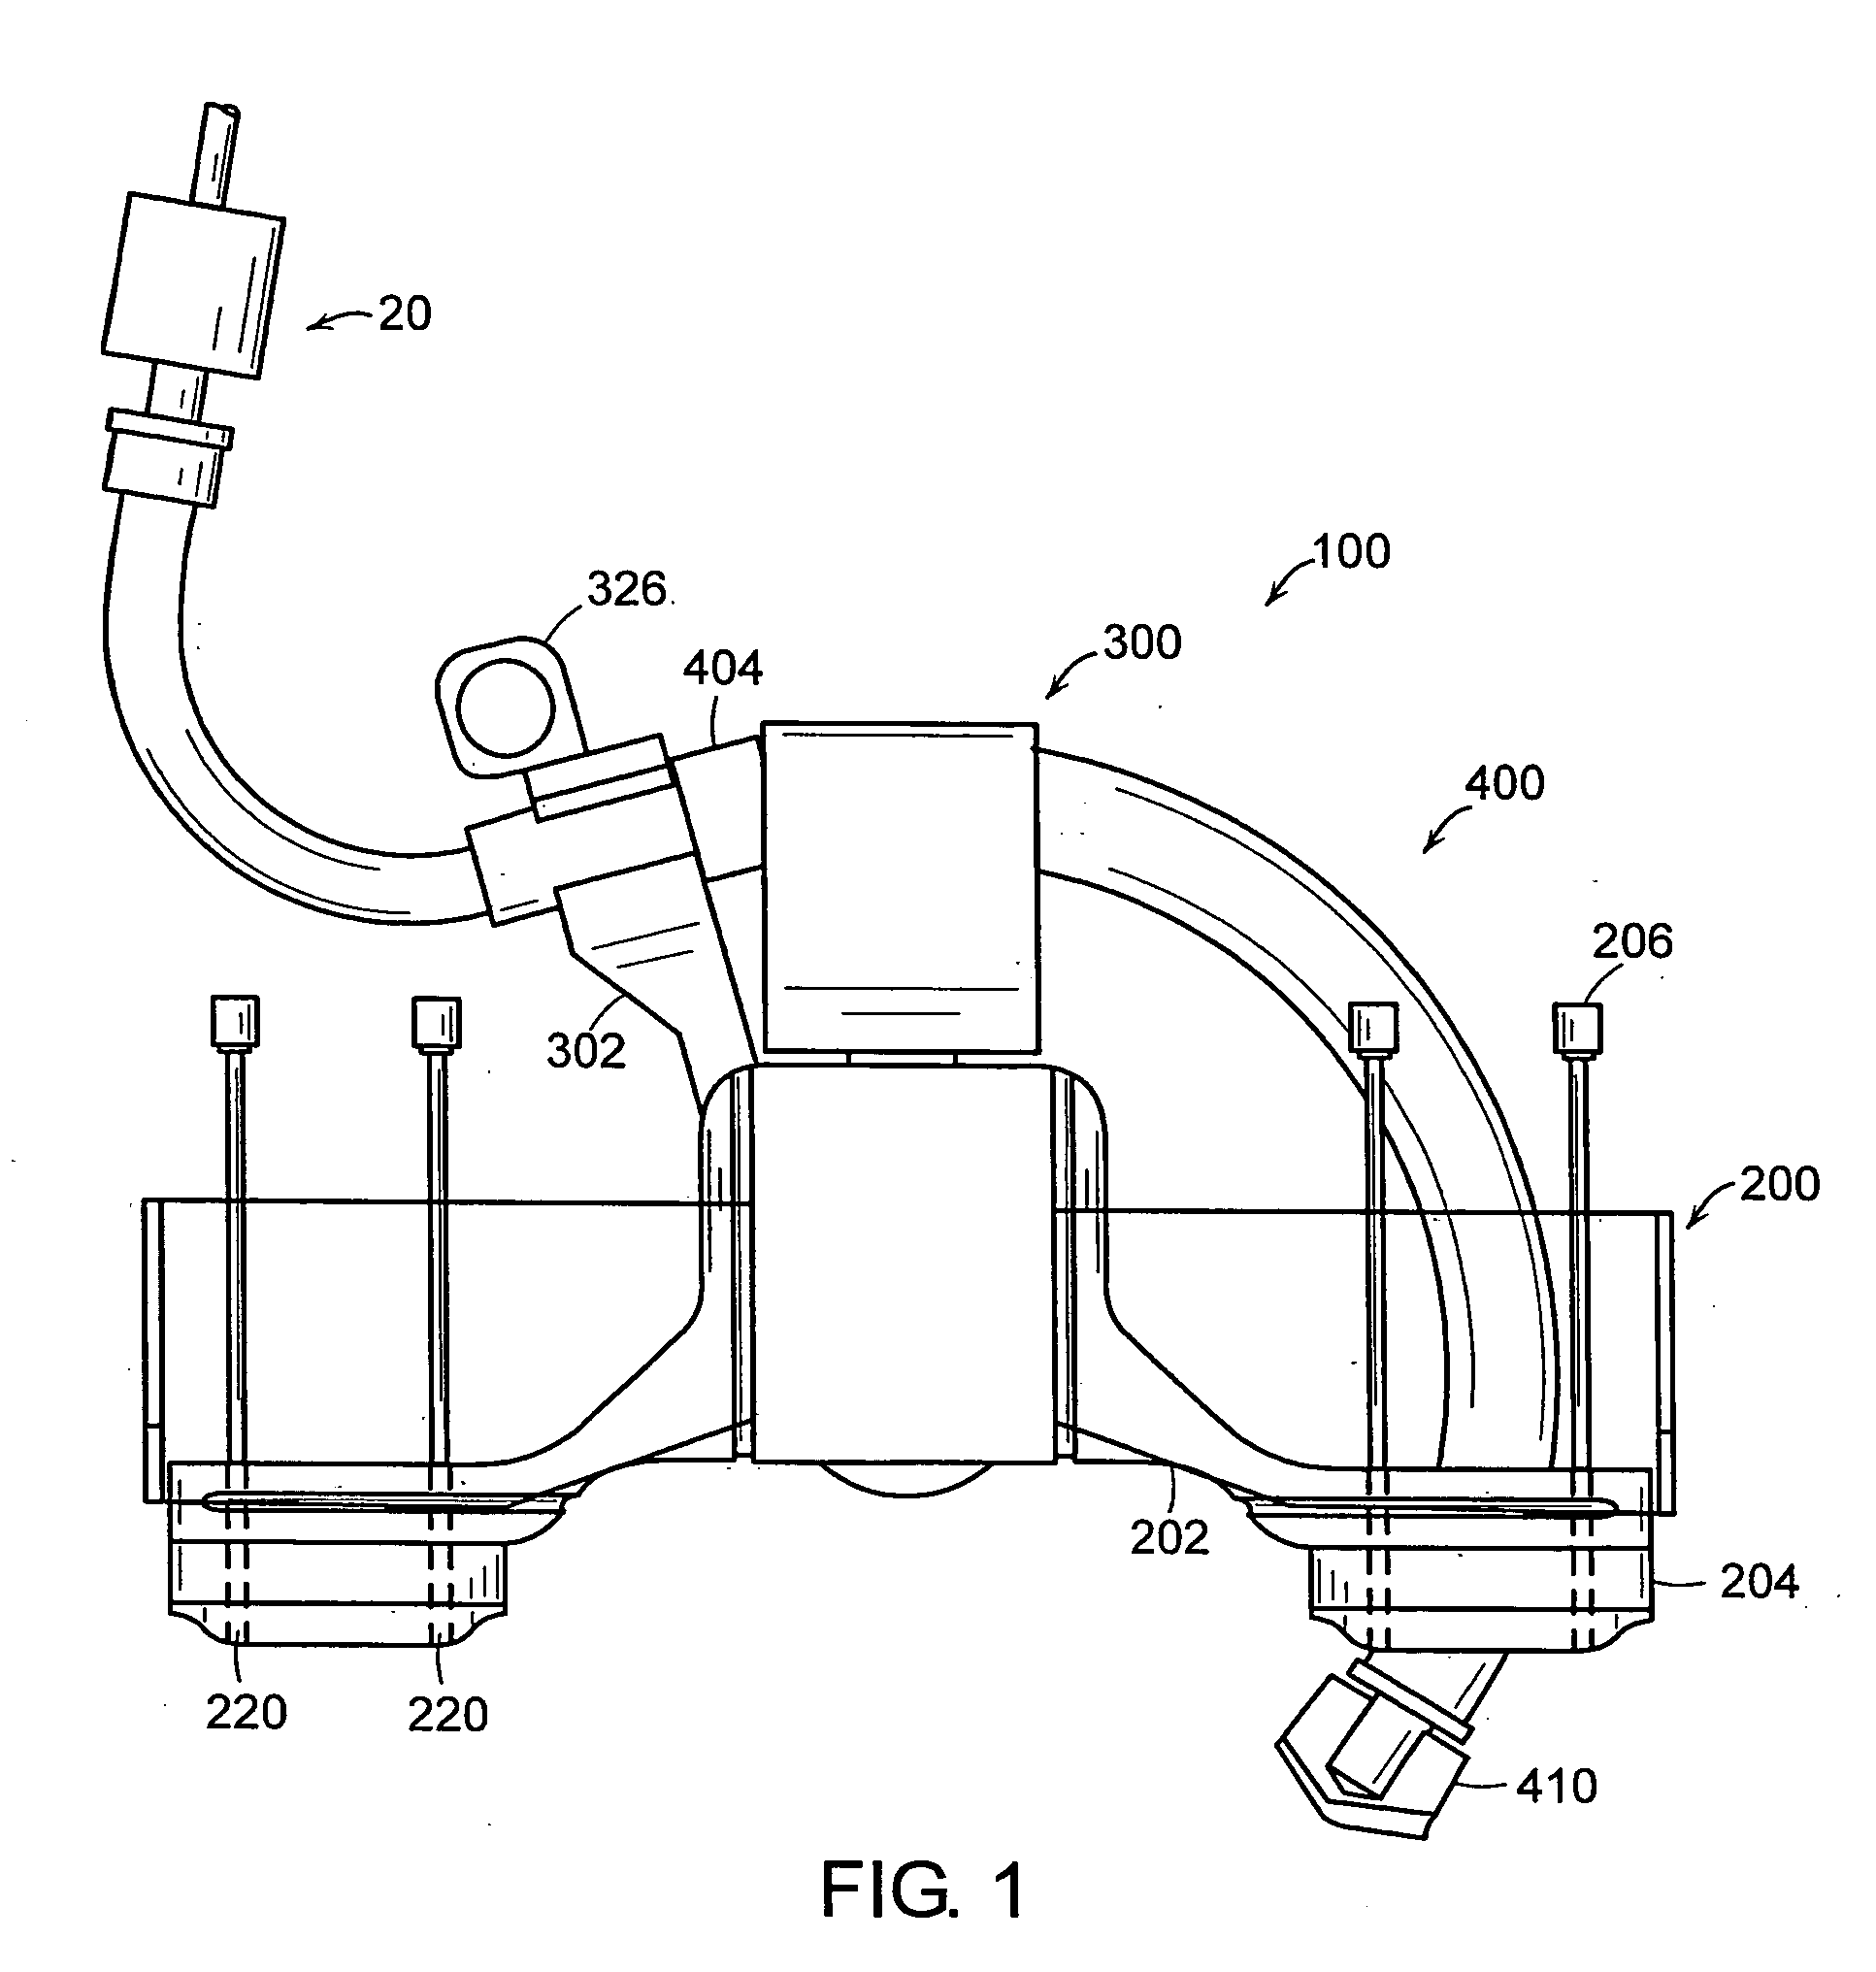 Systems, devices and apparatuses for bony fixation and disk repair and replacement and methods related thereto